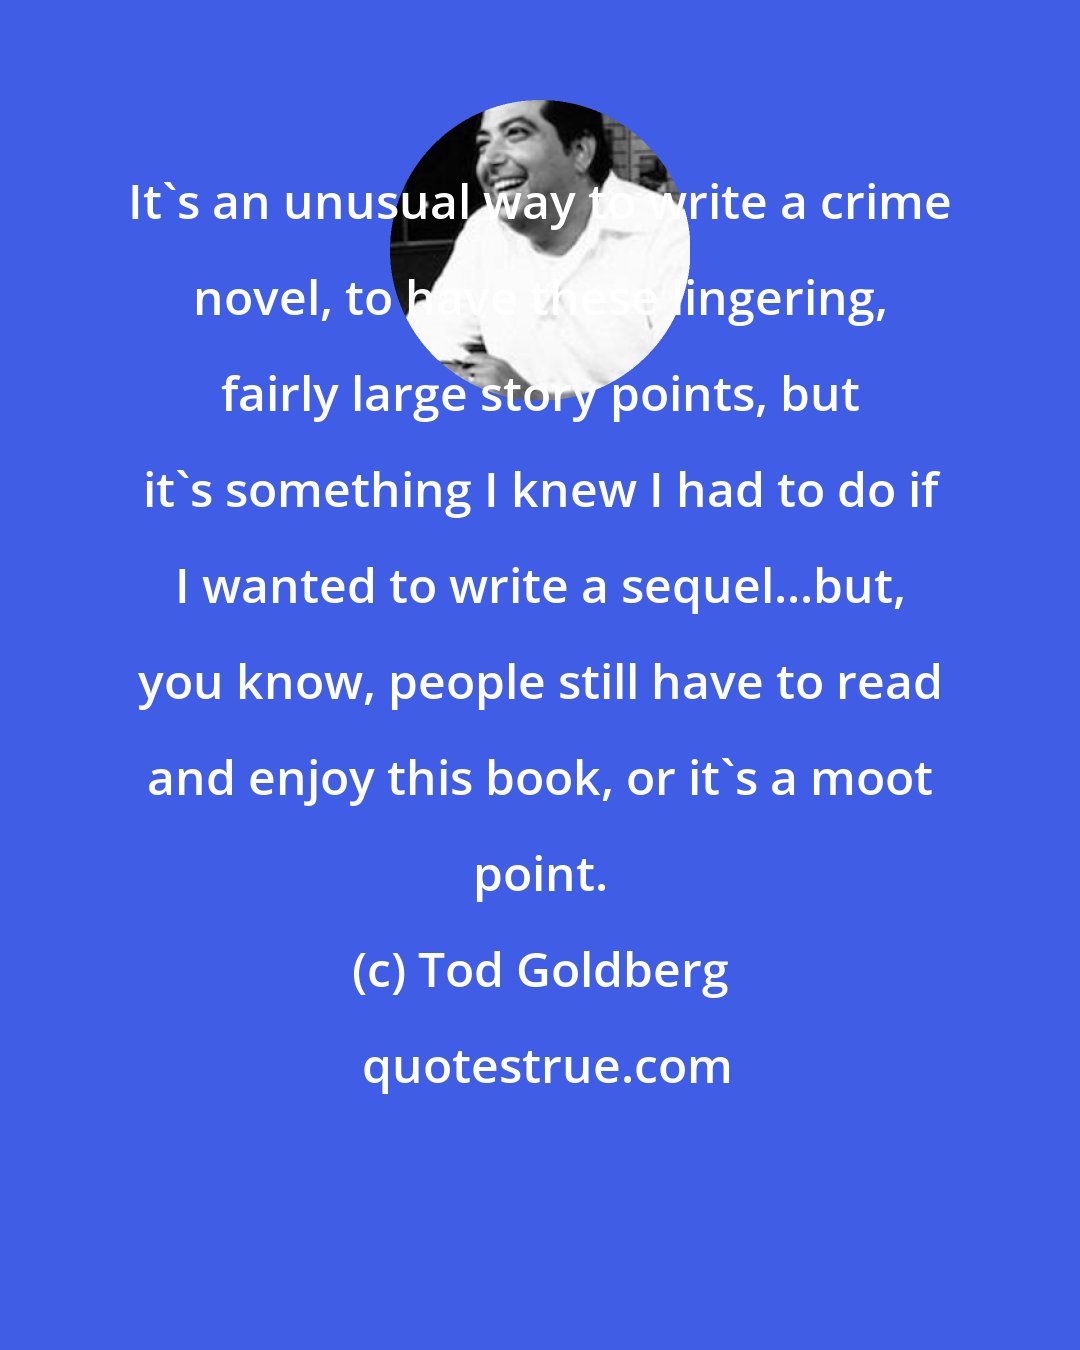 Tod Goldberg: It's an unusual way to write a crime novel, to have these lingering, fairly large story points, but it's something I knew I had to do if I wanted to write a sequel...but, you know, people still have to read and enjoy this book, or it's a moot point.